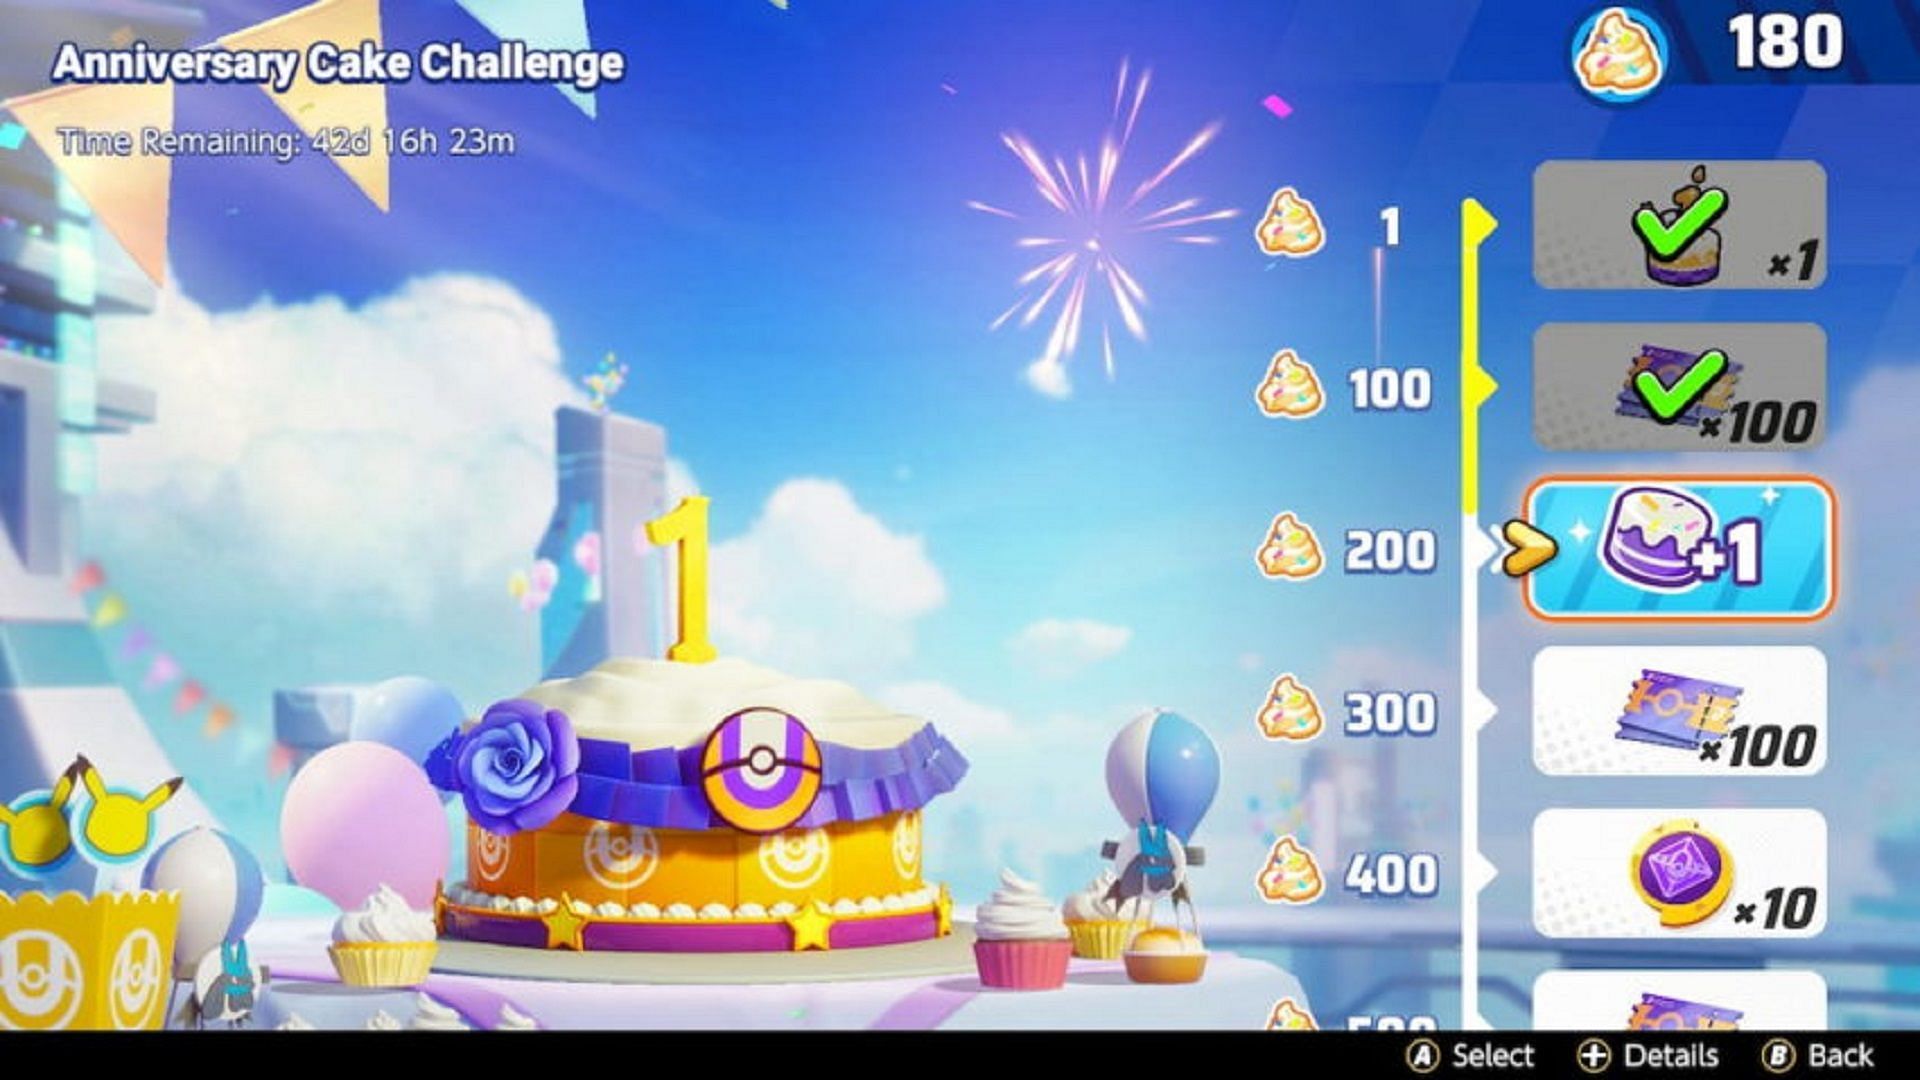 The anniversary cake in its starting stages (Image via The Pokemon Company)